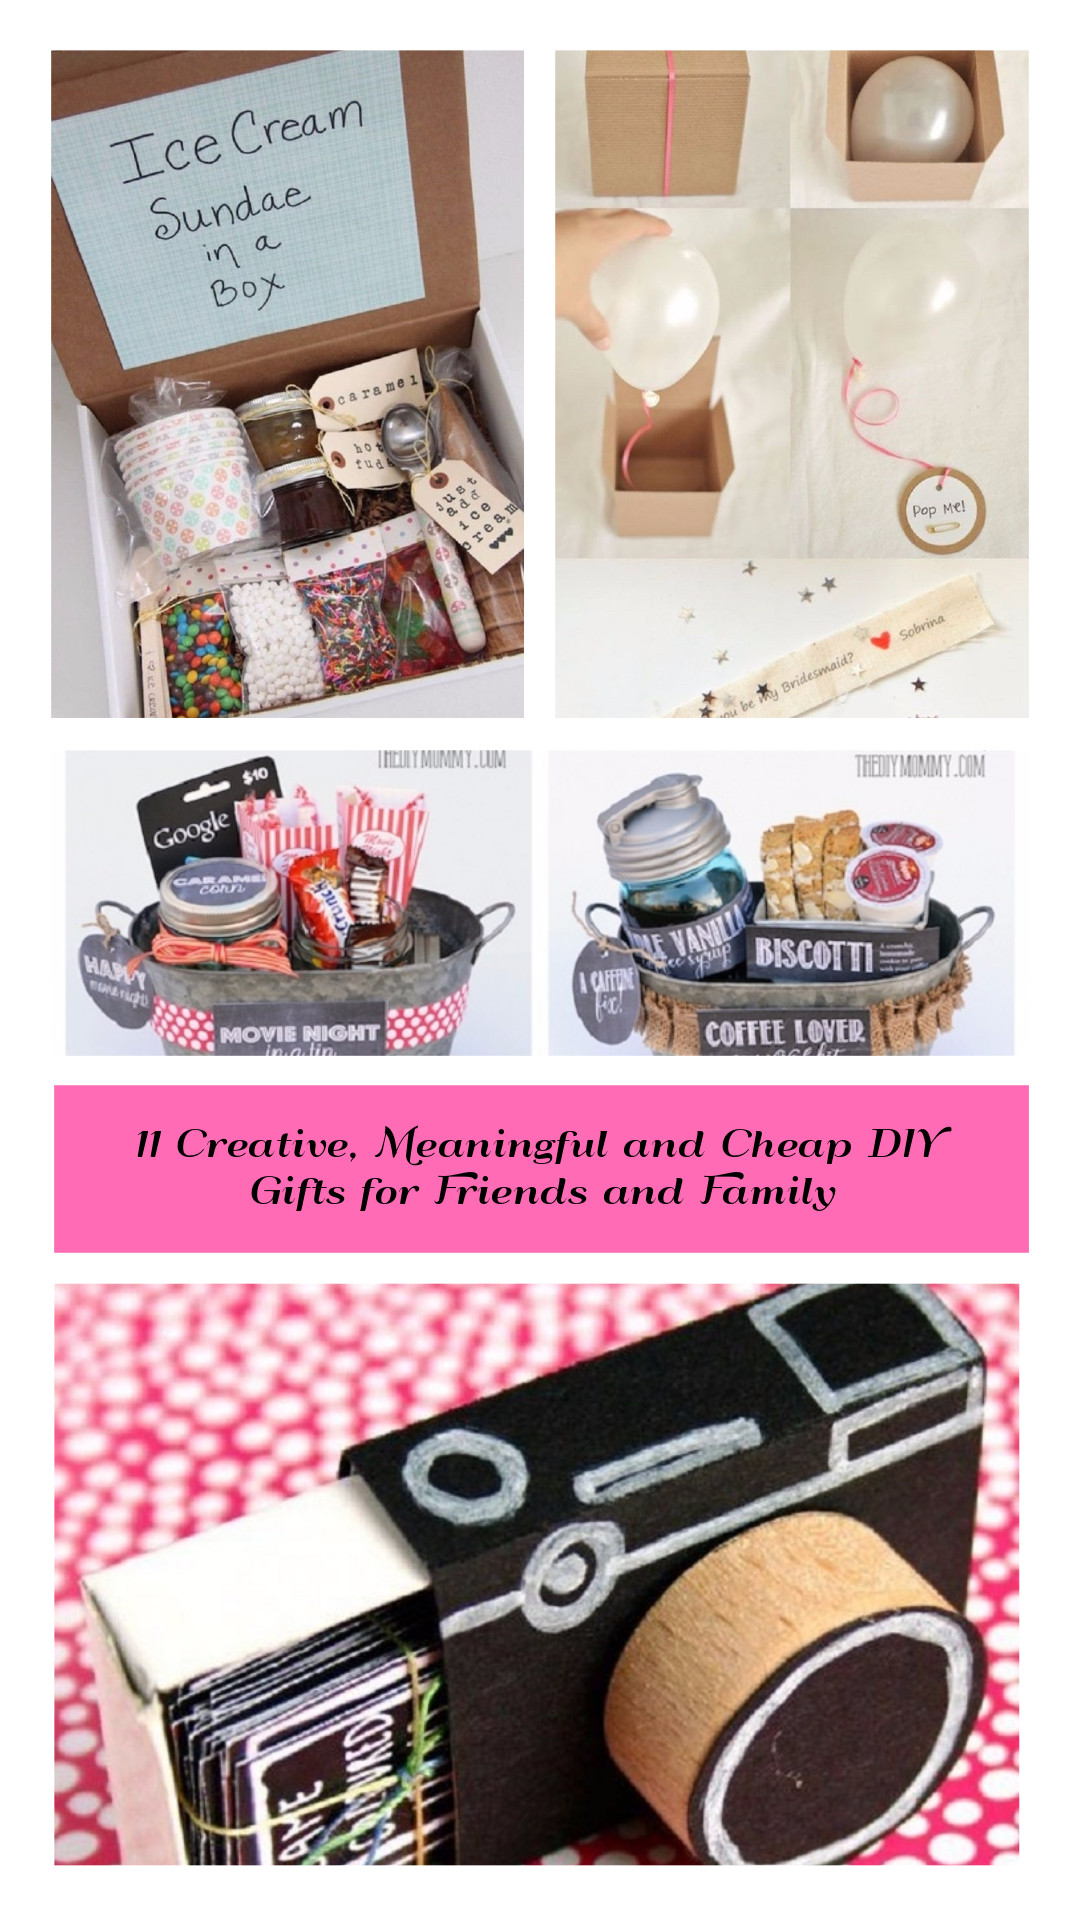 Birthday Gifts Diy
 11 Creative Meaningful and Cheap DIY Gifts for Friends